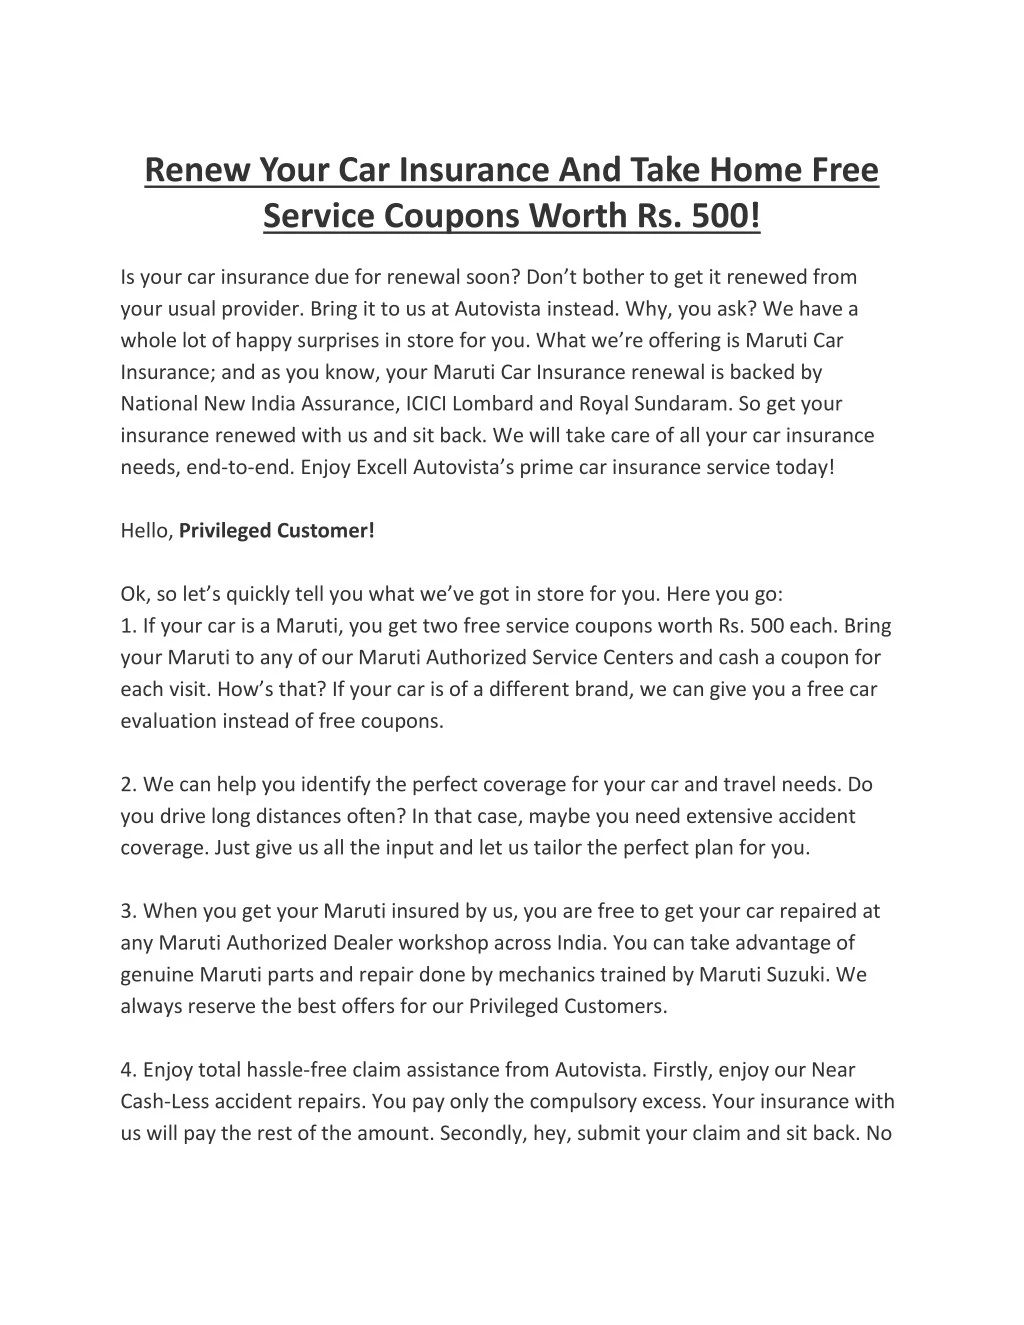 renew your car insurance and take home free